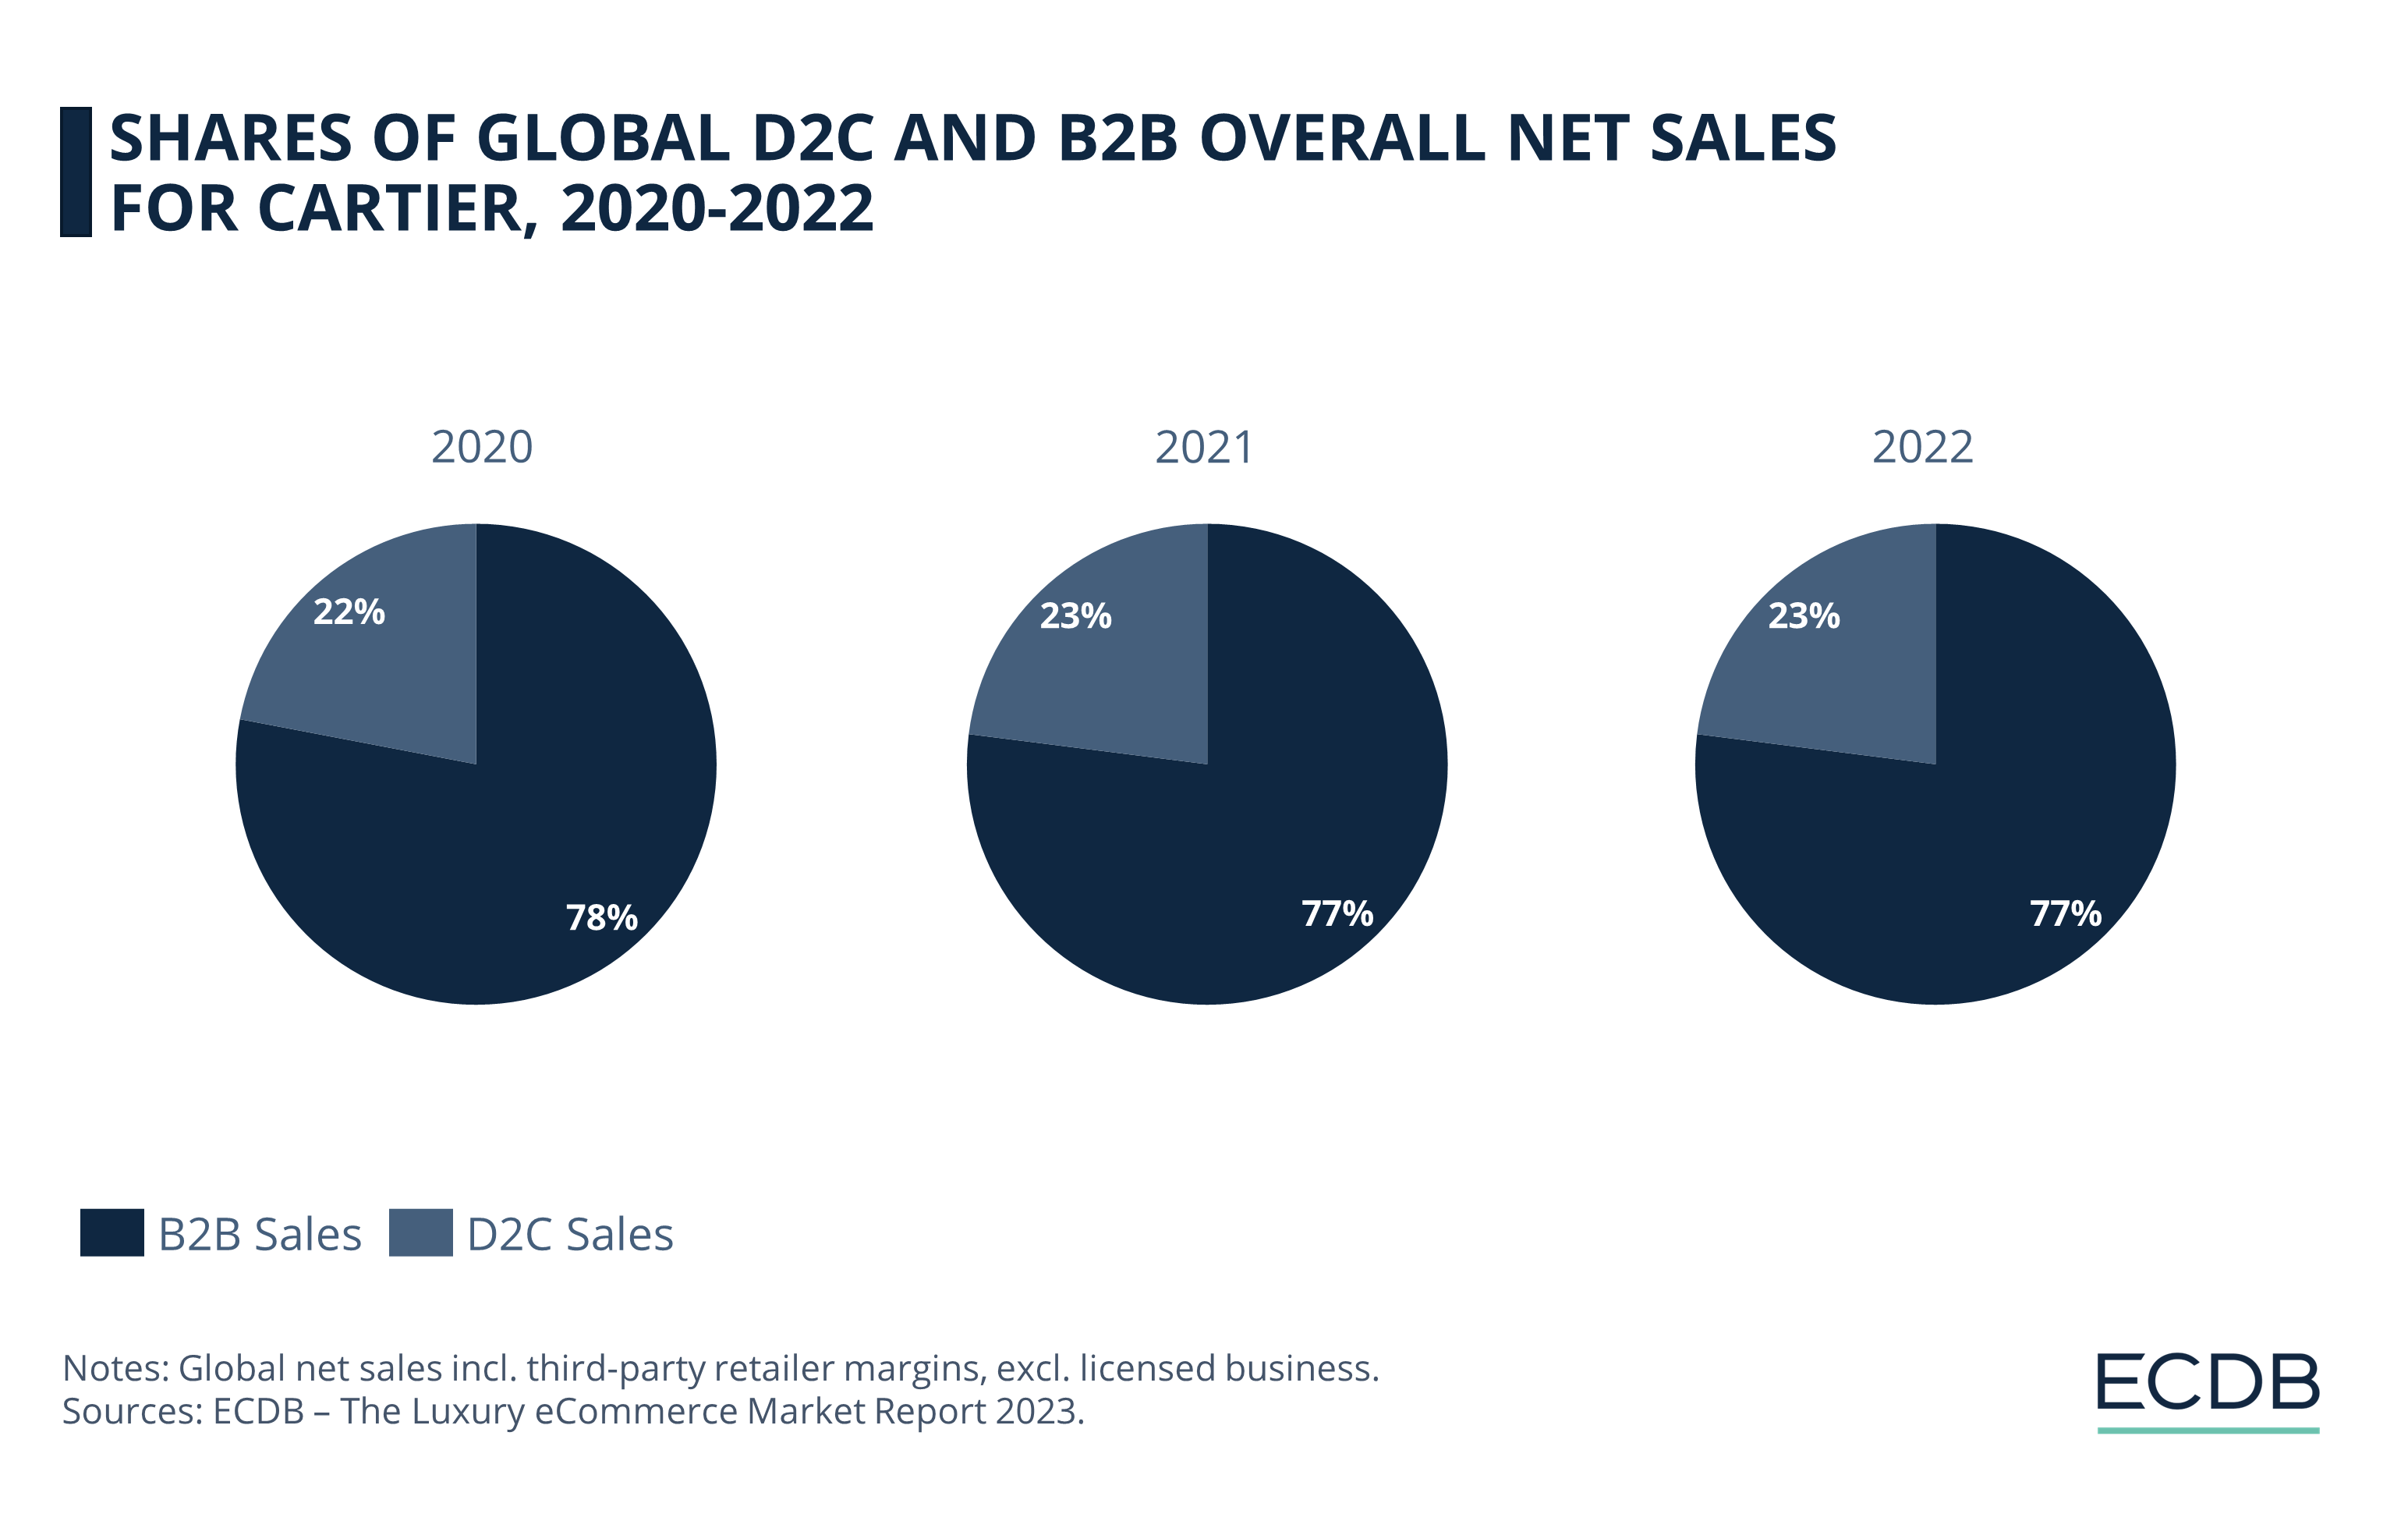 Shares of Global D2C and B2B Overall Net Sales for Cartier, 2020-2022